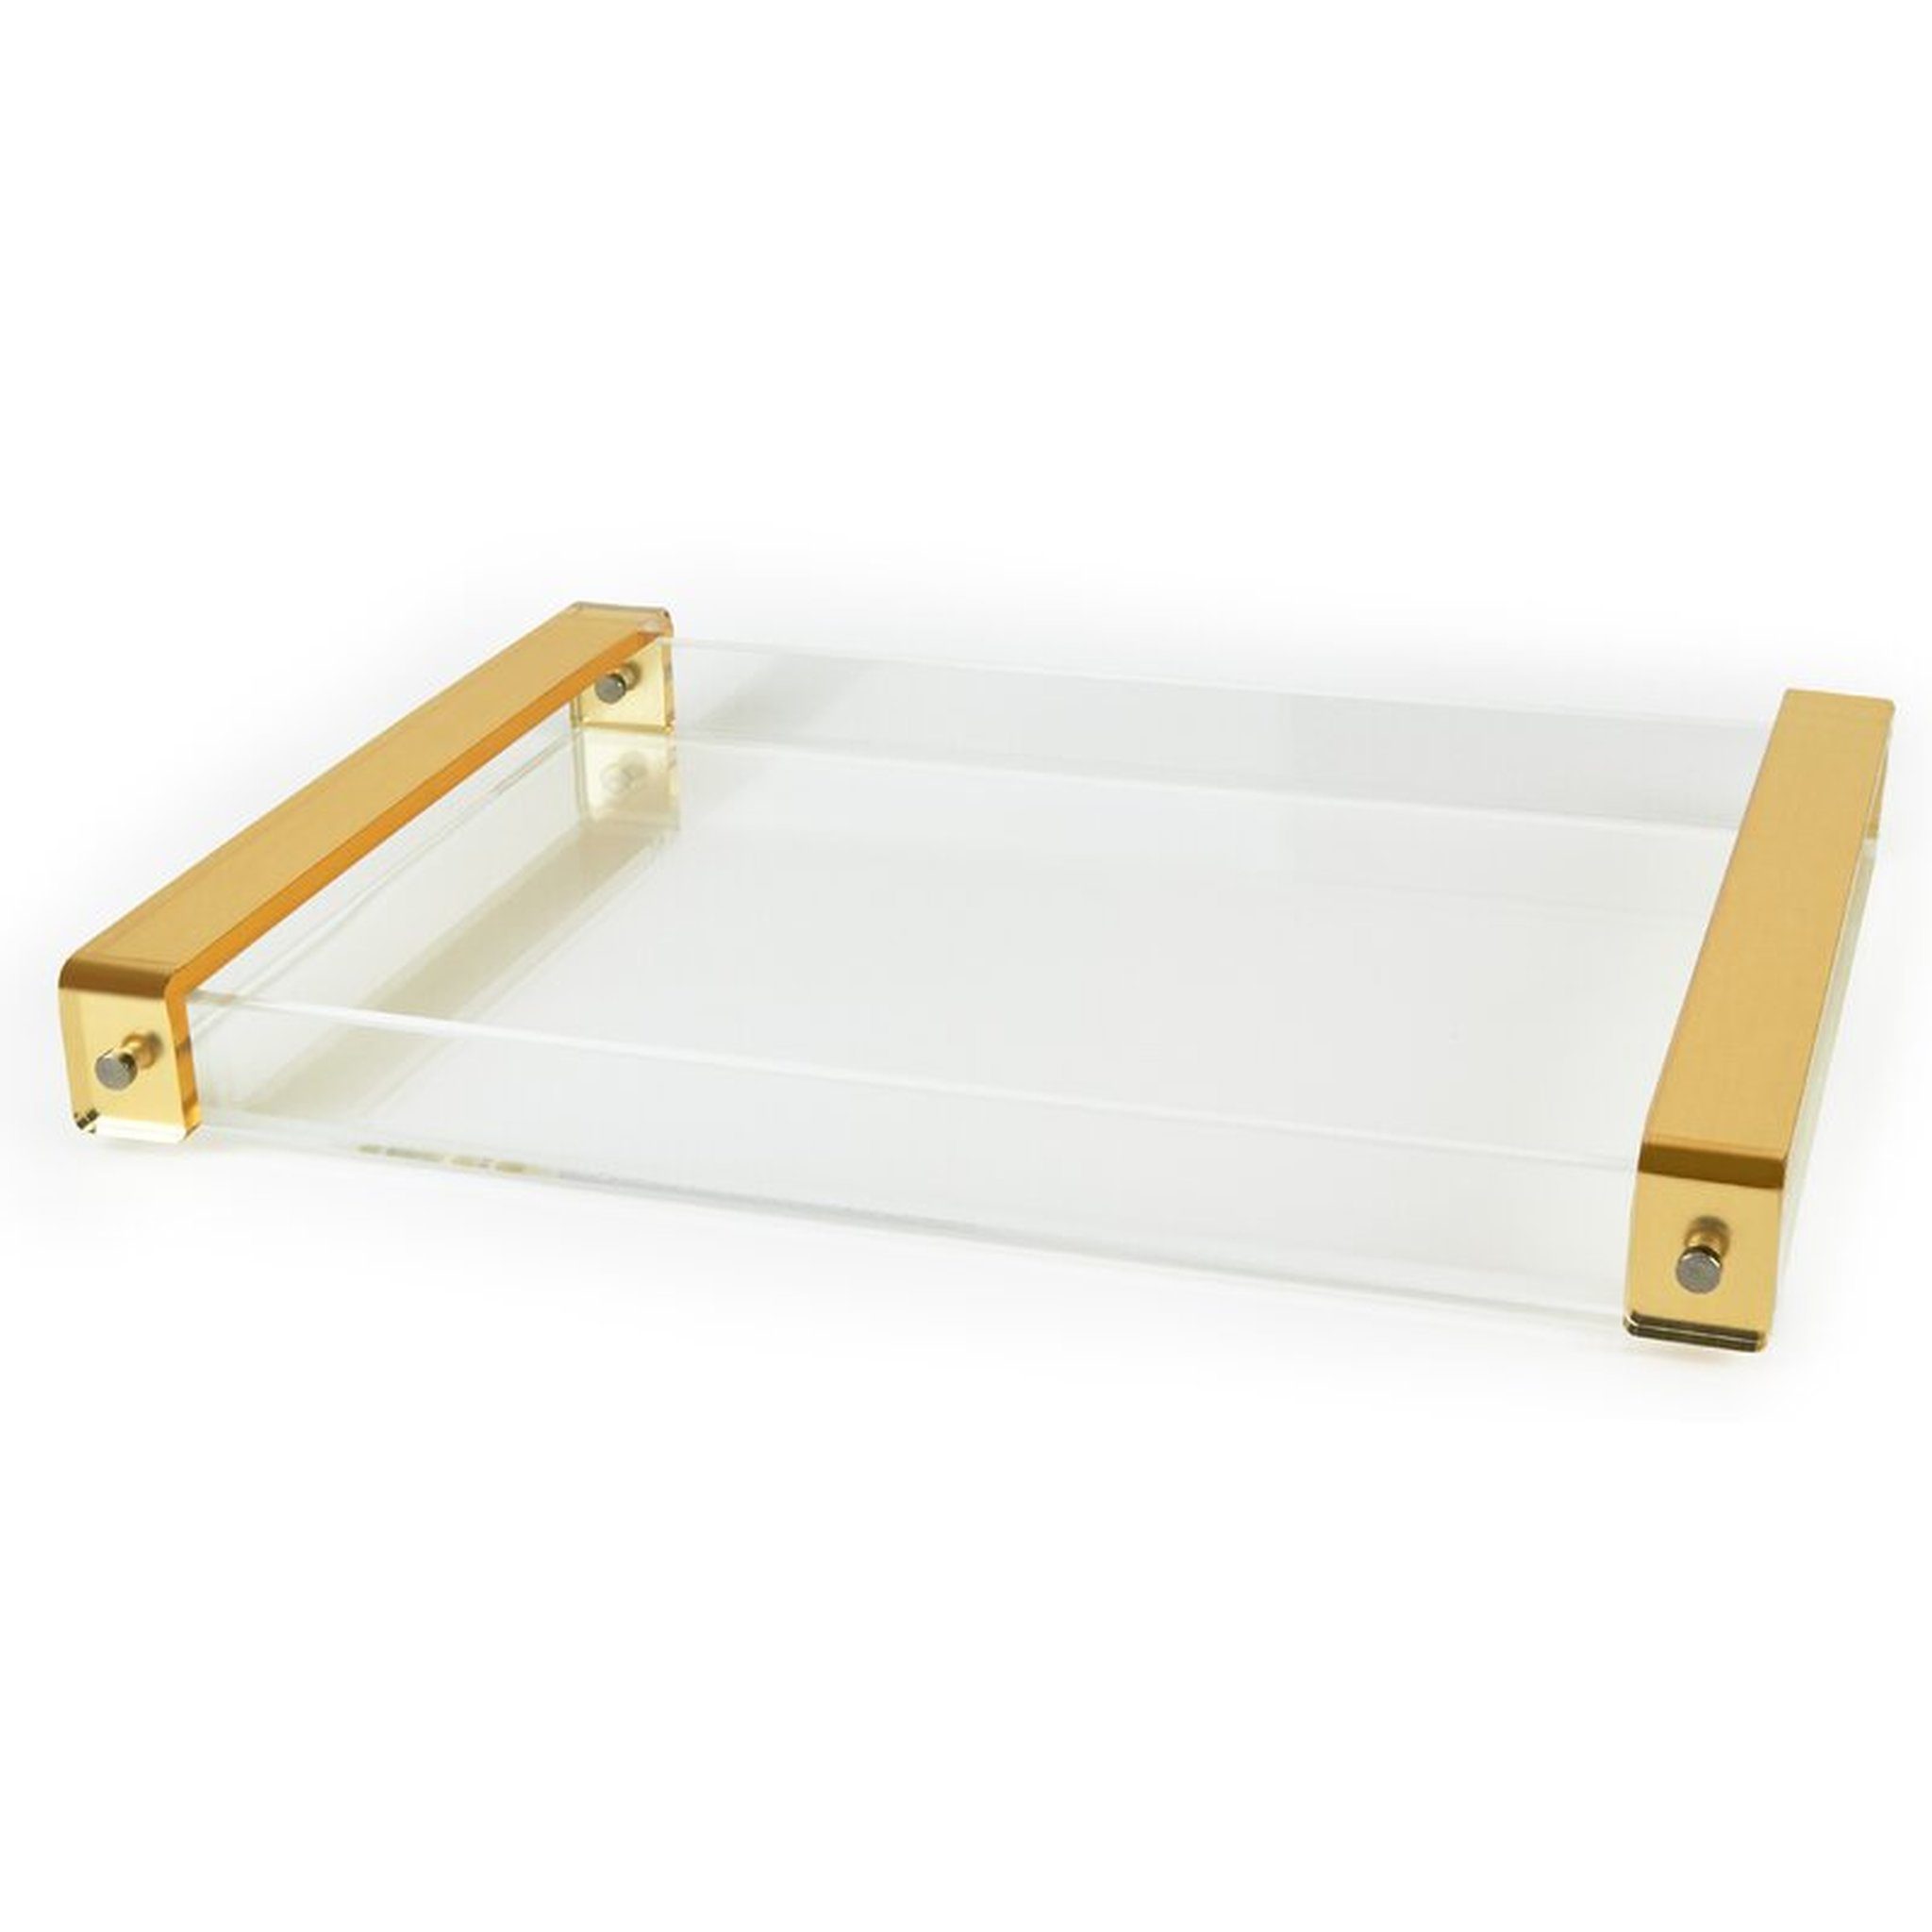 Tizo Lucite Inset-Handle Tray - Gold